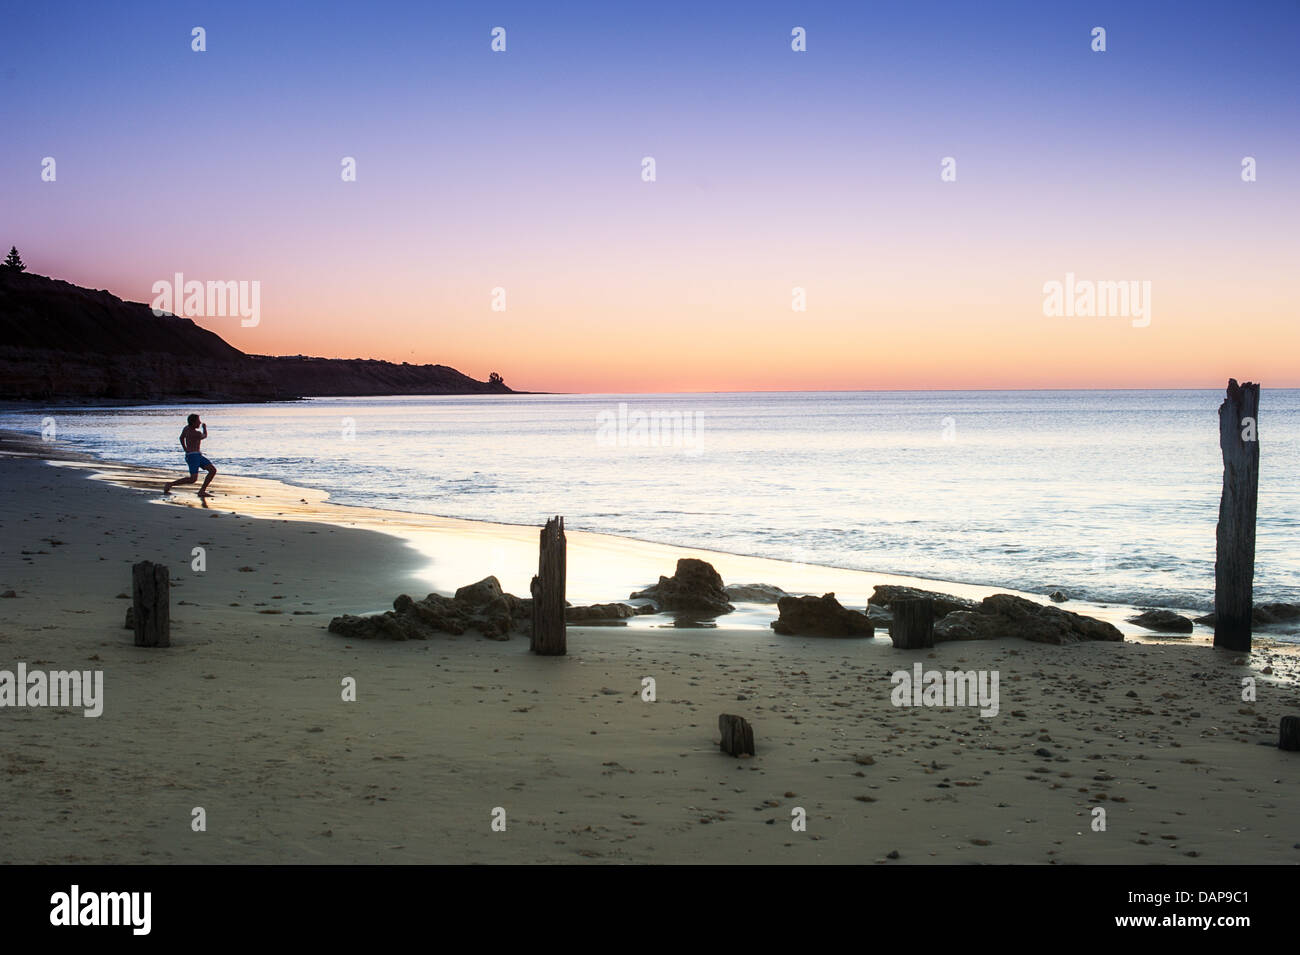 A silhouette of a person skipping stones at sunset on the calm waters of Australia's Port Willunga beach. Stock Photo